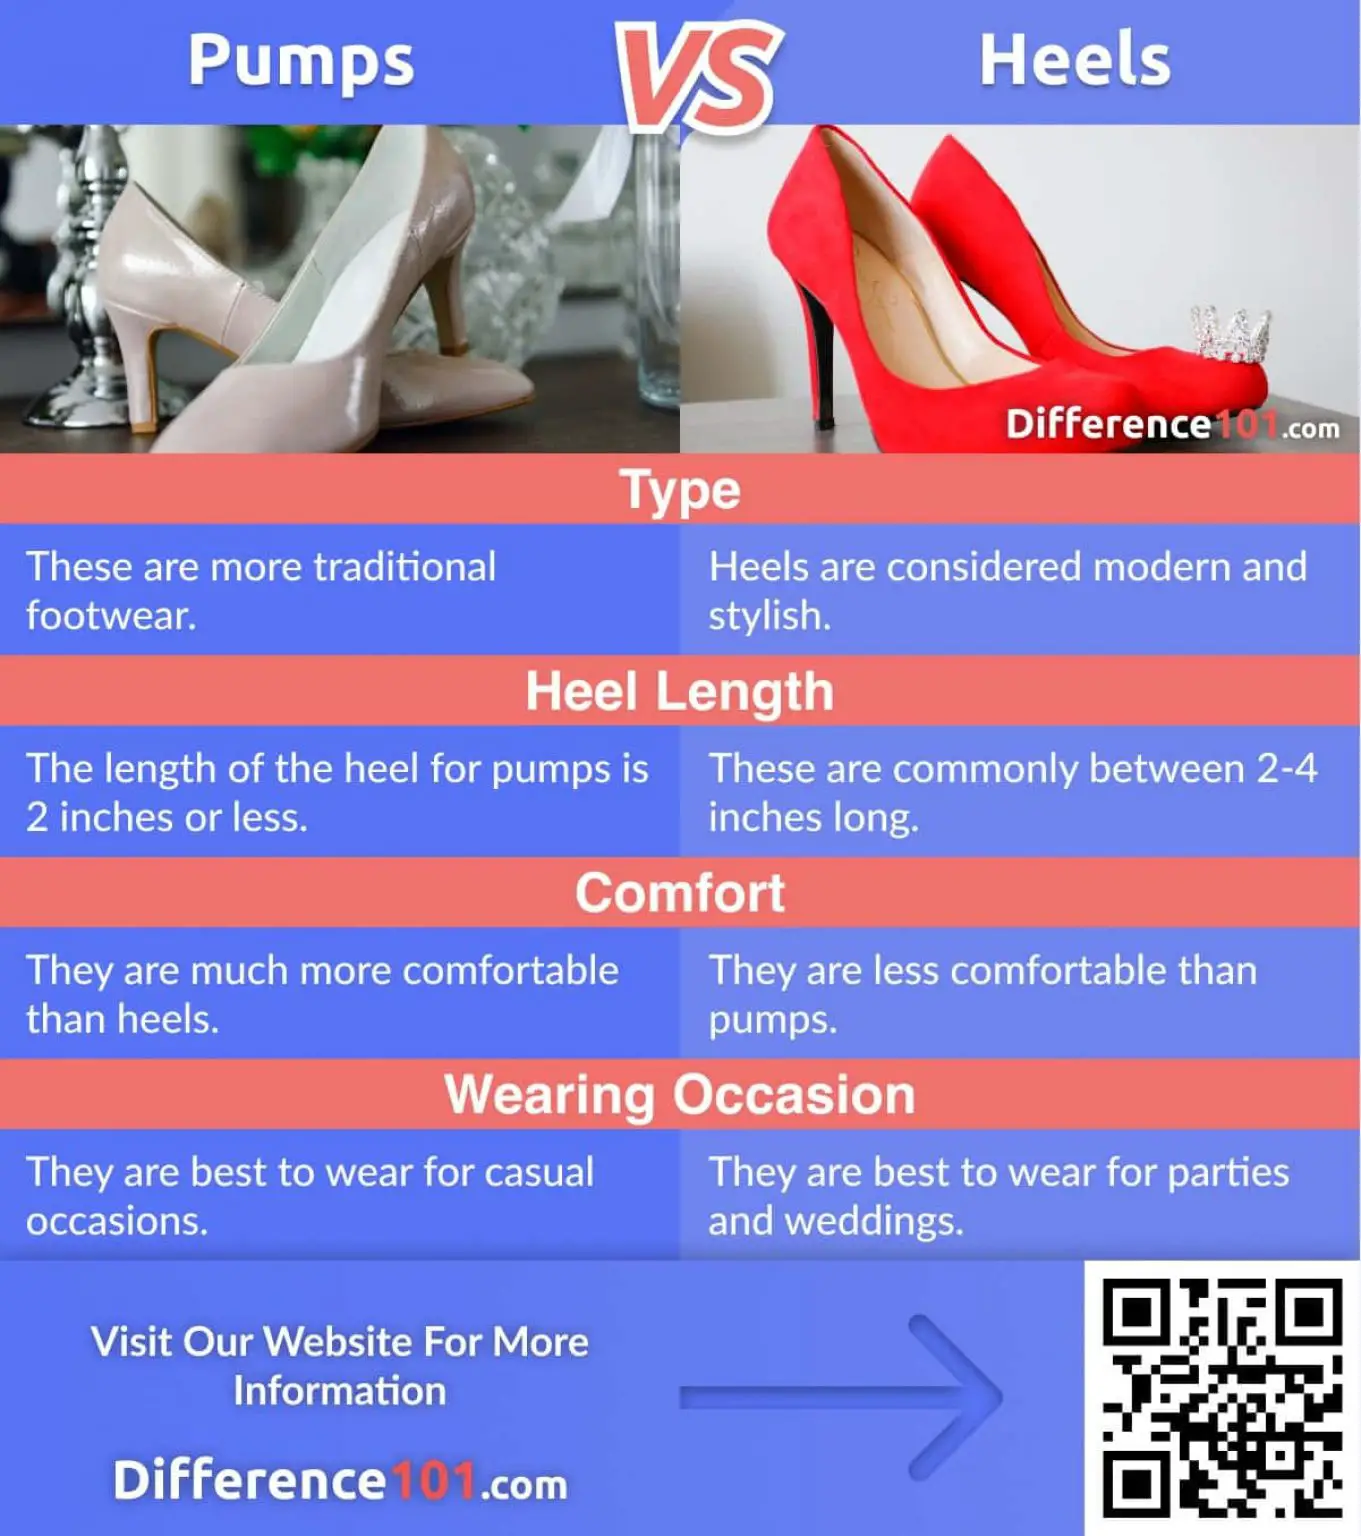 Pumps vs. Heels: Differences, Comfort, Pros & Cons ~ Difference 101